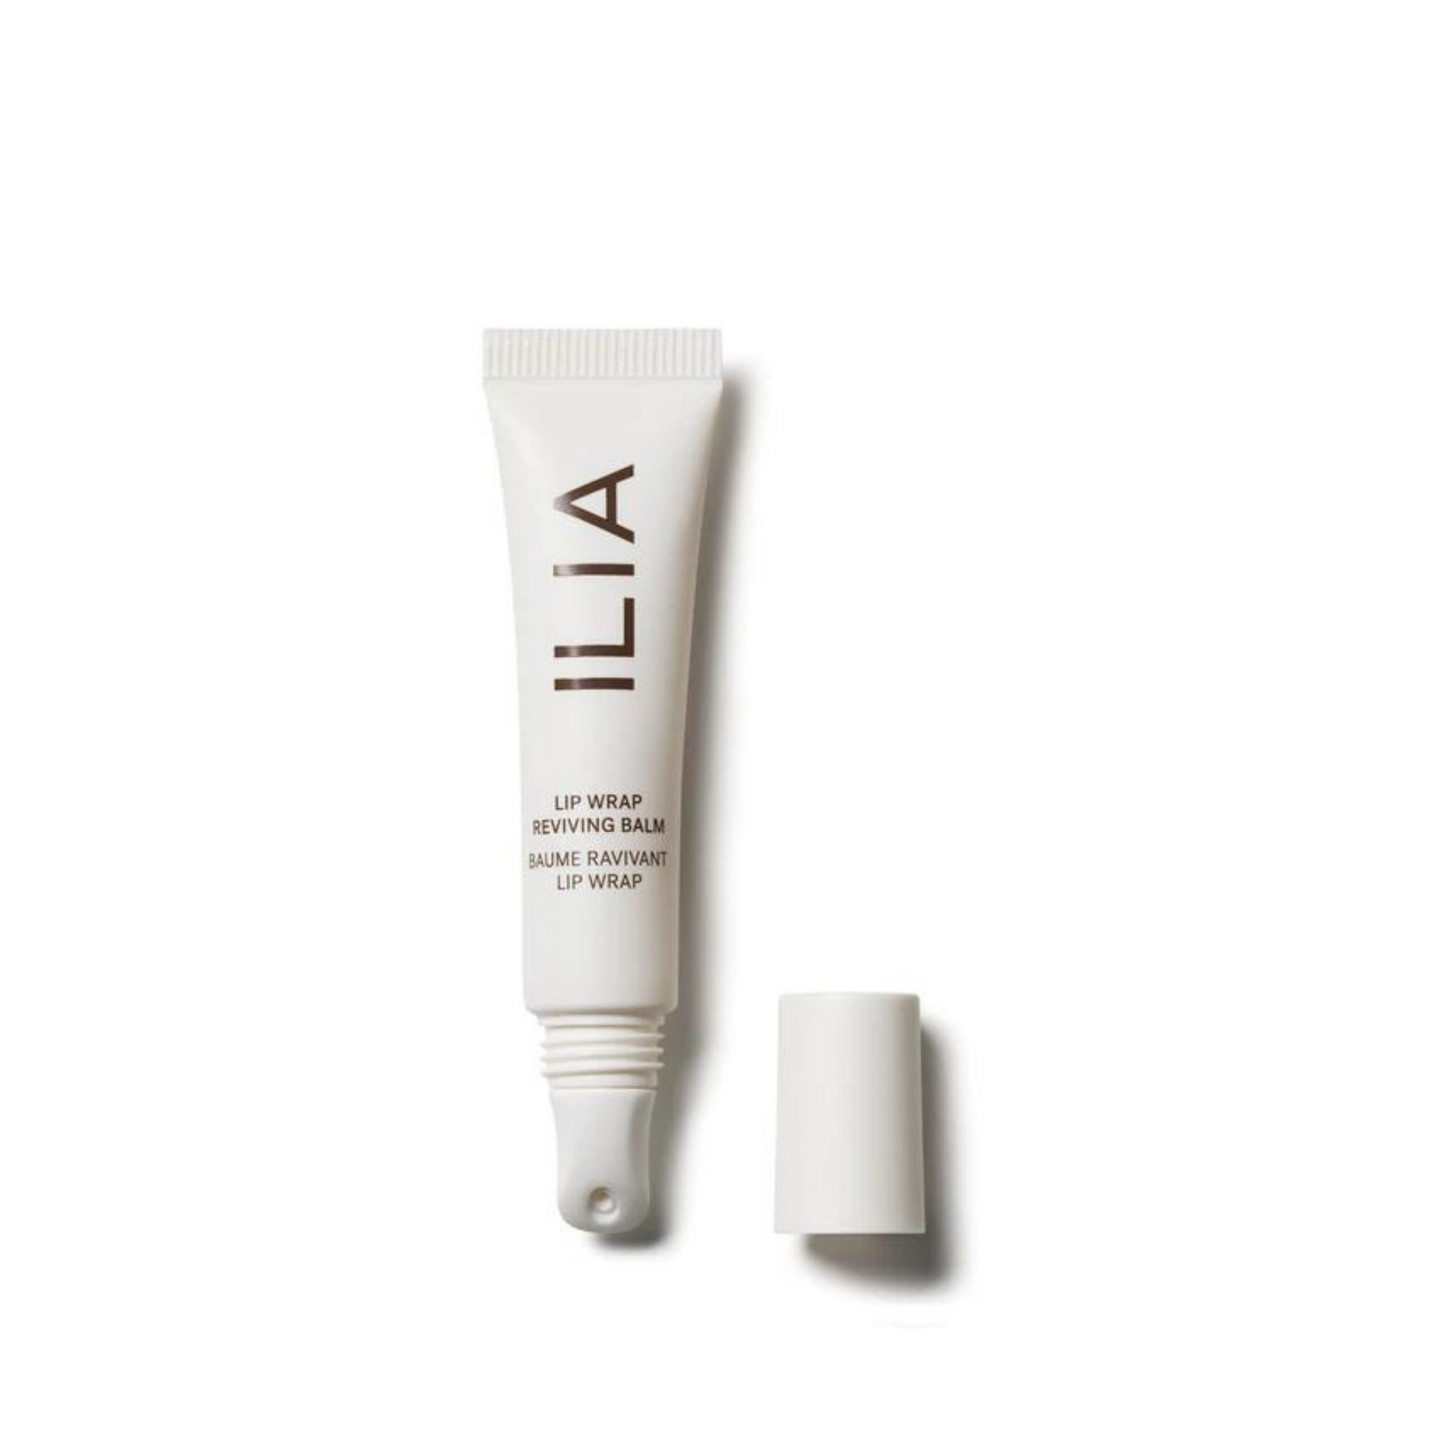 Primary Image of Lip Wrap Reviving Balm - Lucid